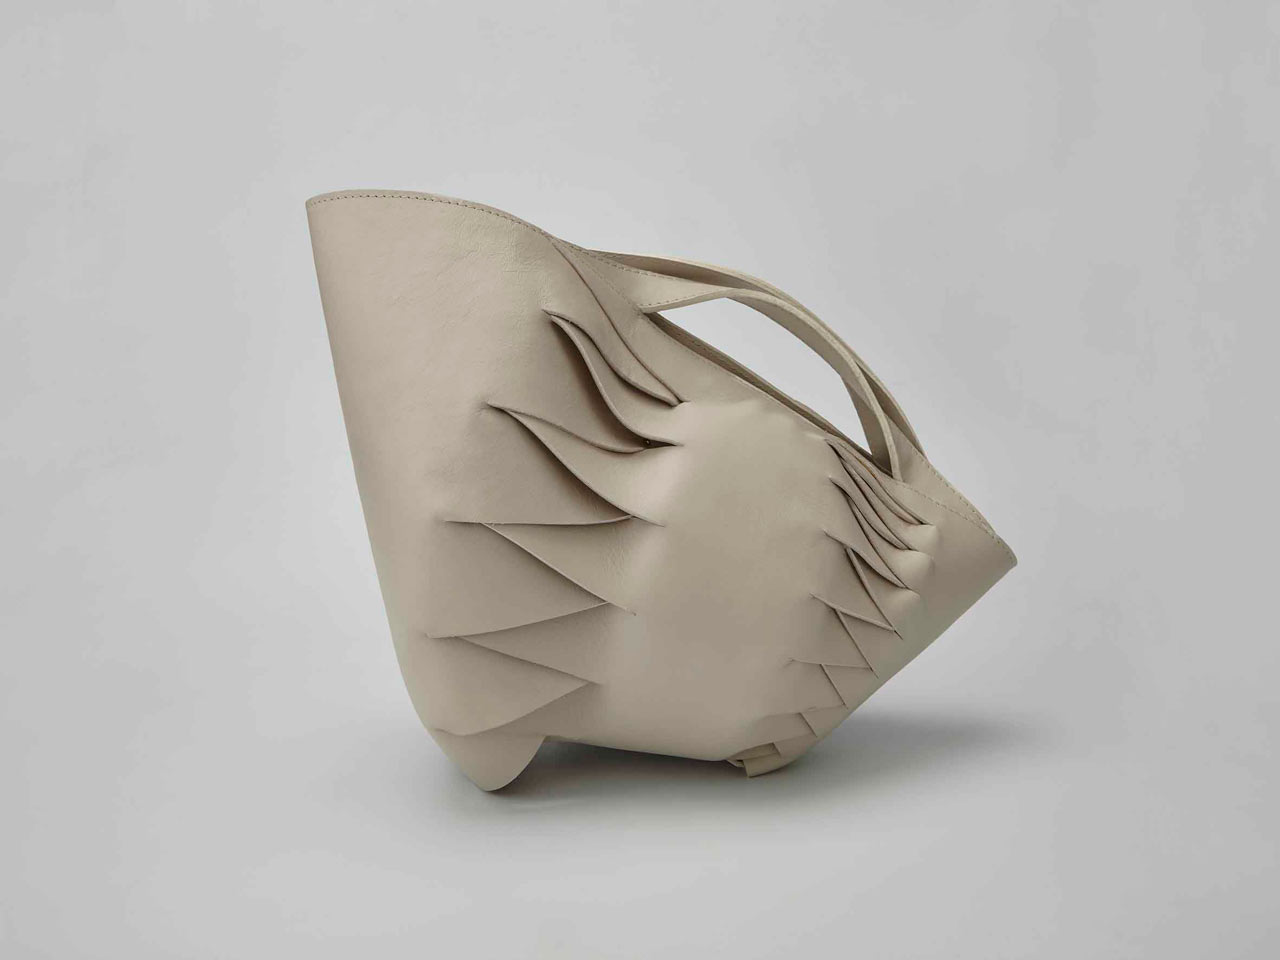 System and Form: Bags Inspired by Hair Braids